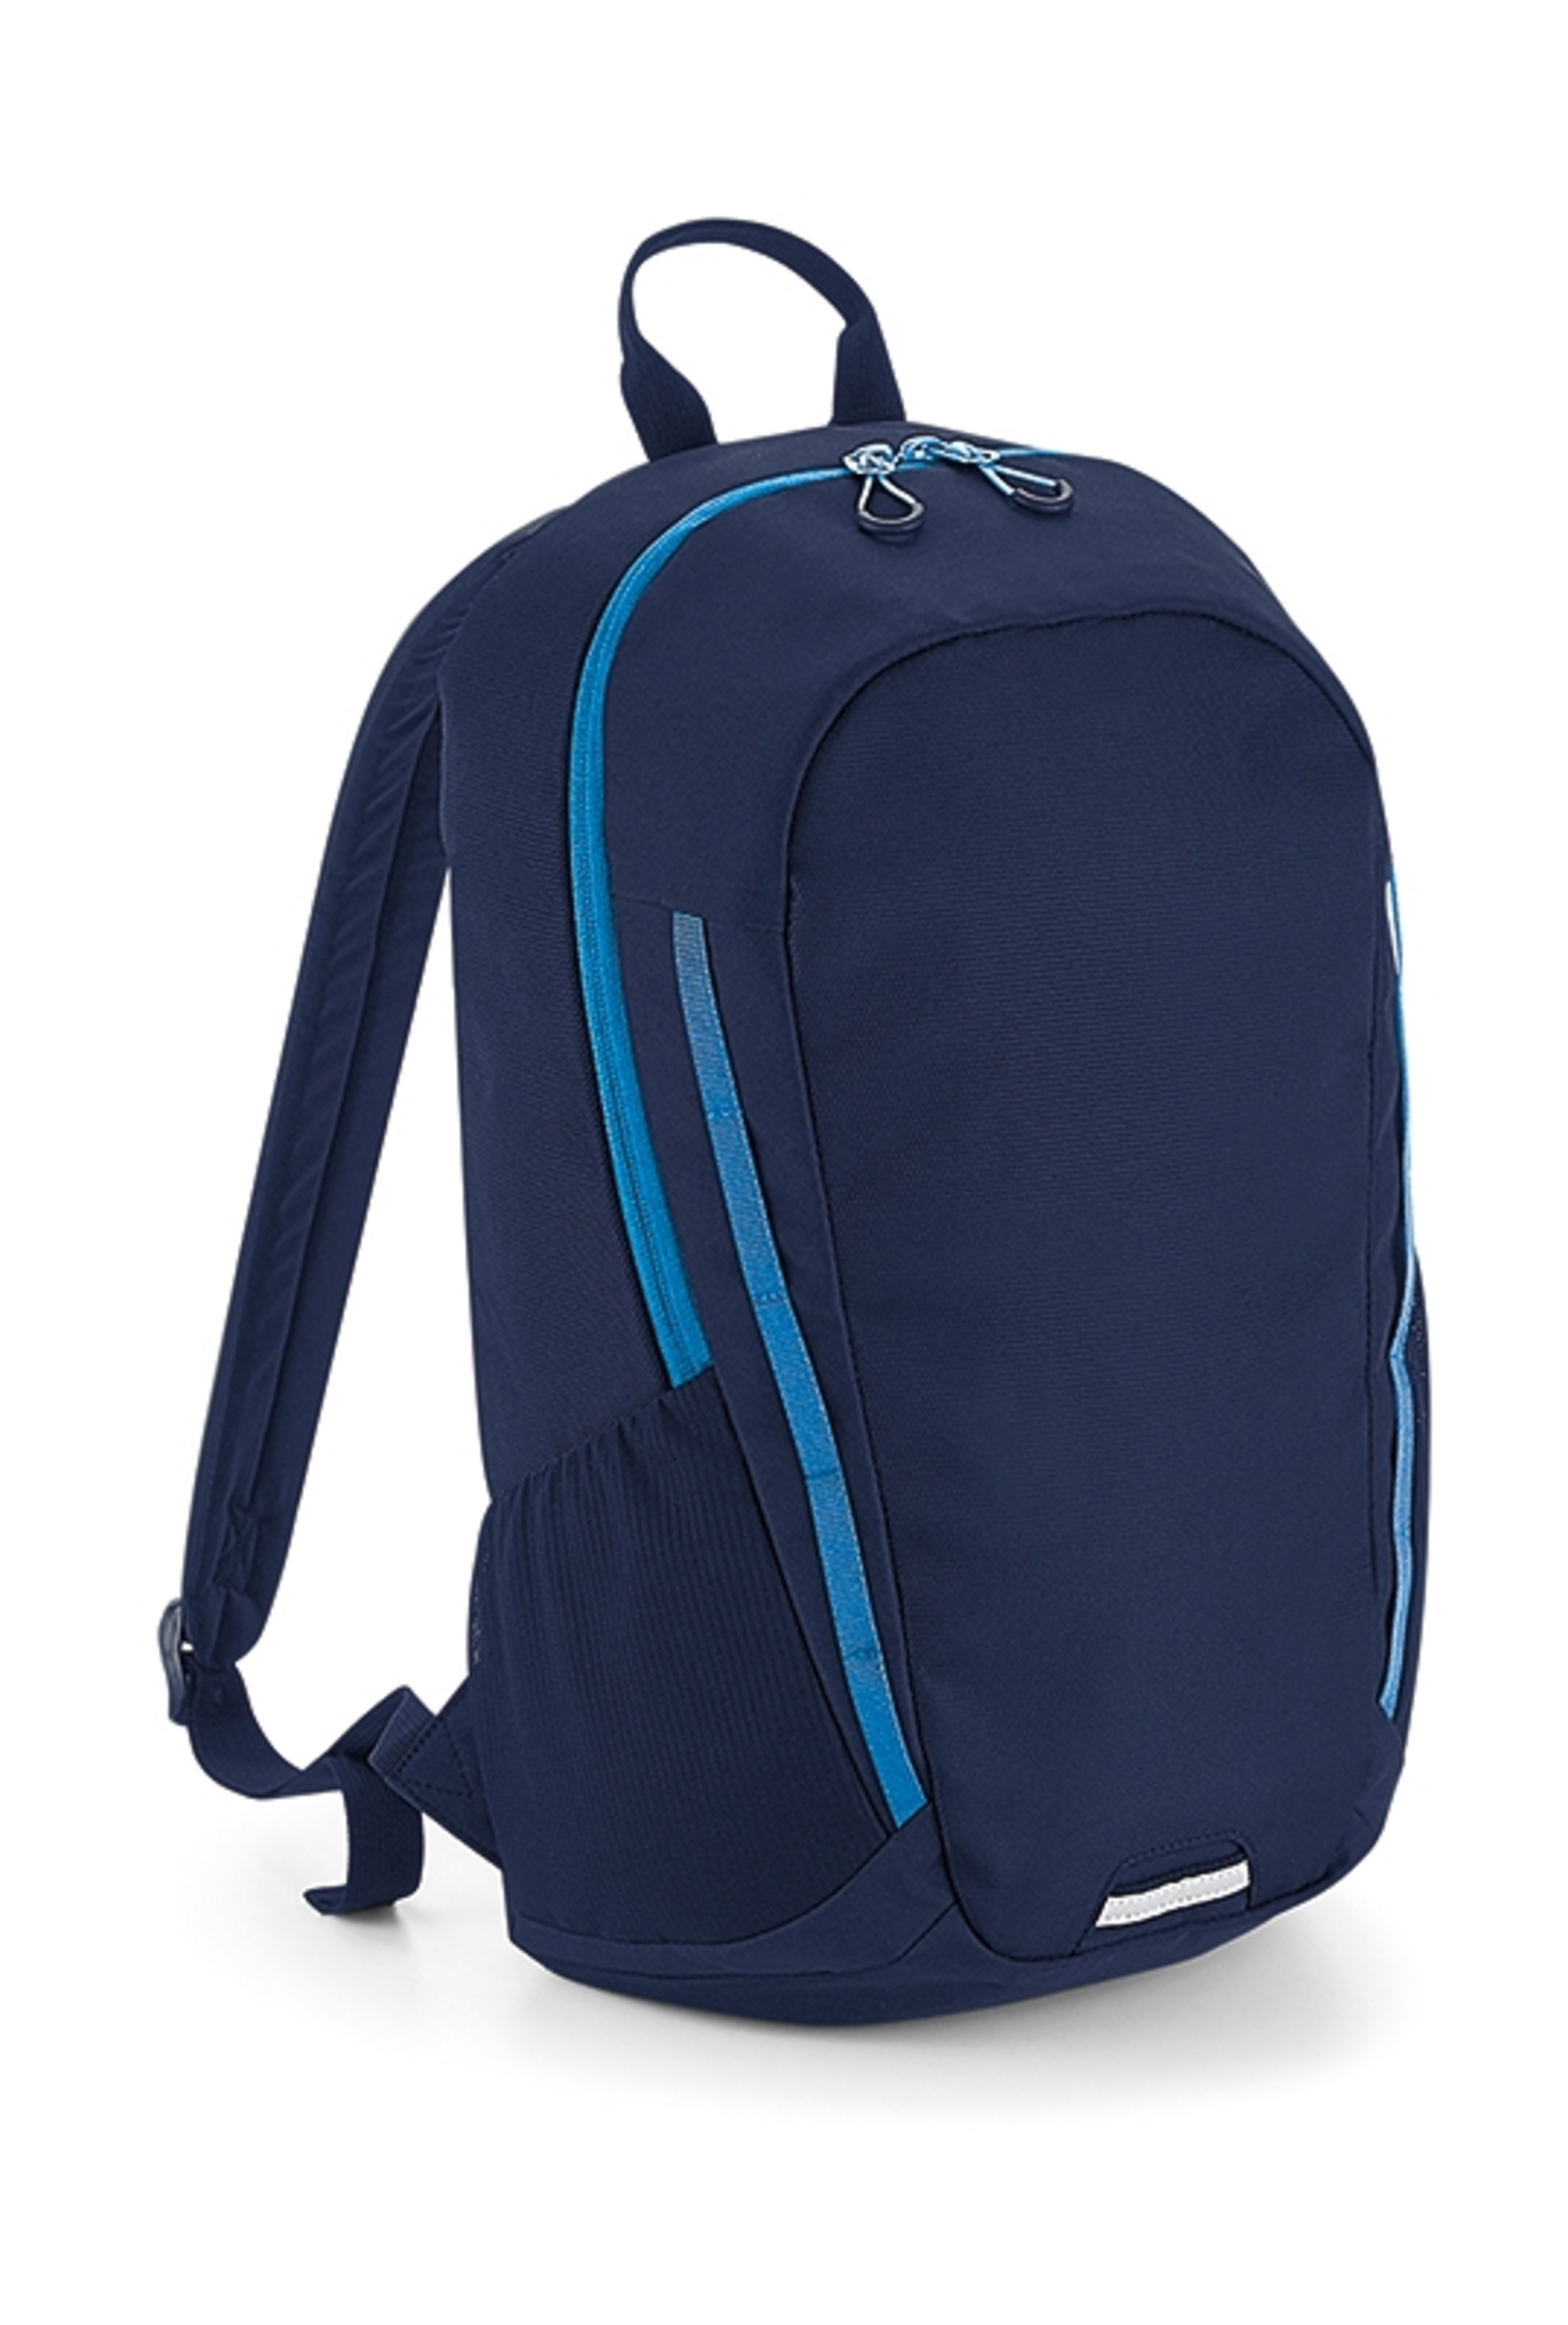 Bag Base Urban Trail Pack - French Navy/Sapphire Blue - One Size